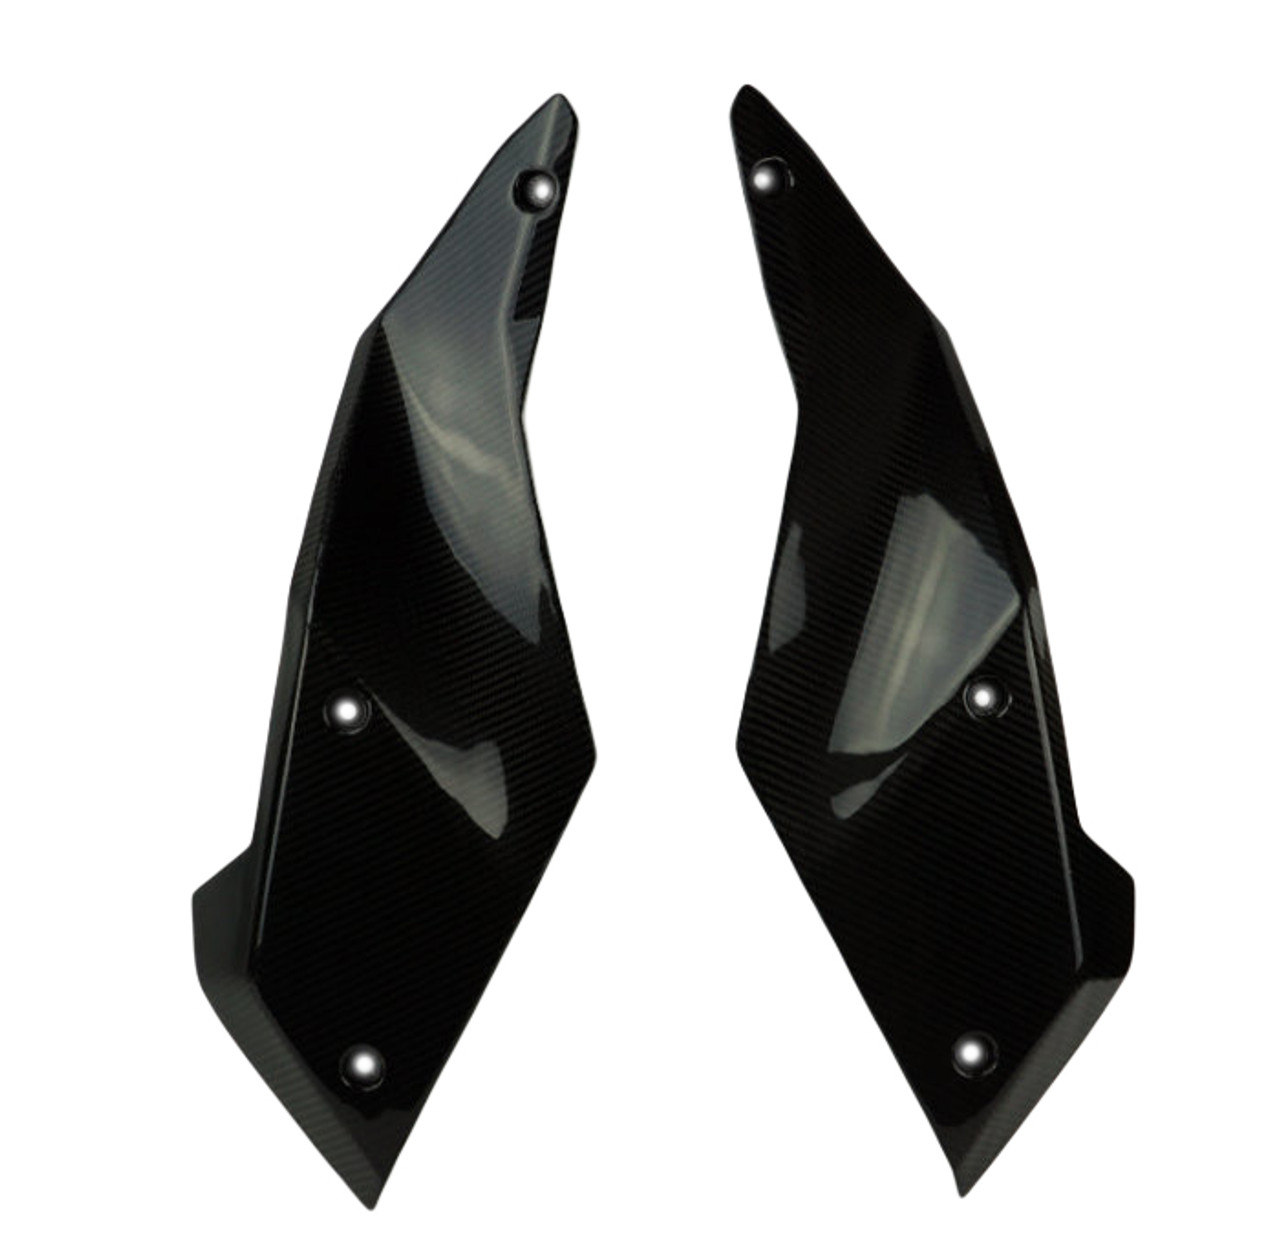 Tank Side Covers in Glossy Twill Weave Carbon Fiber for KTM Supermoto 990 SMR 2008-2013